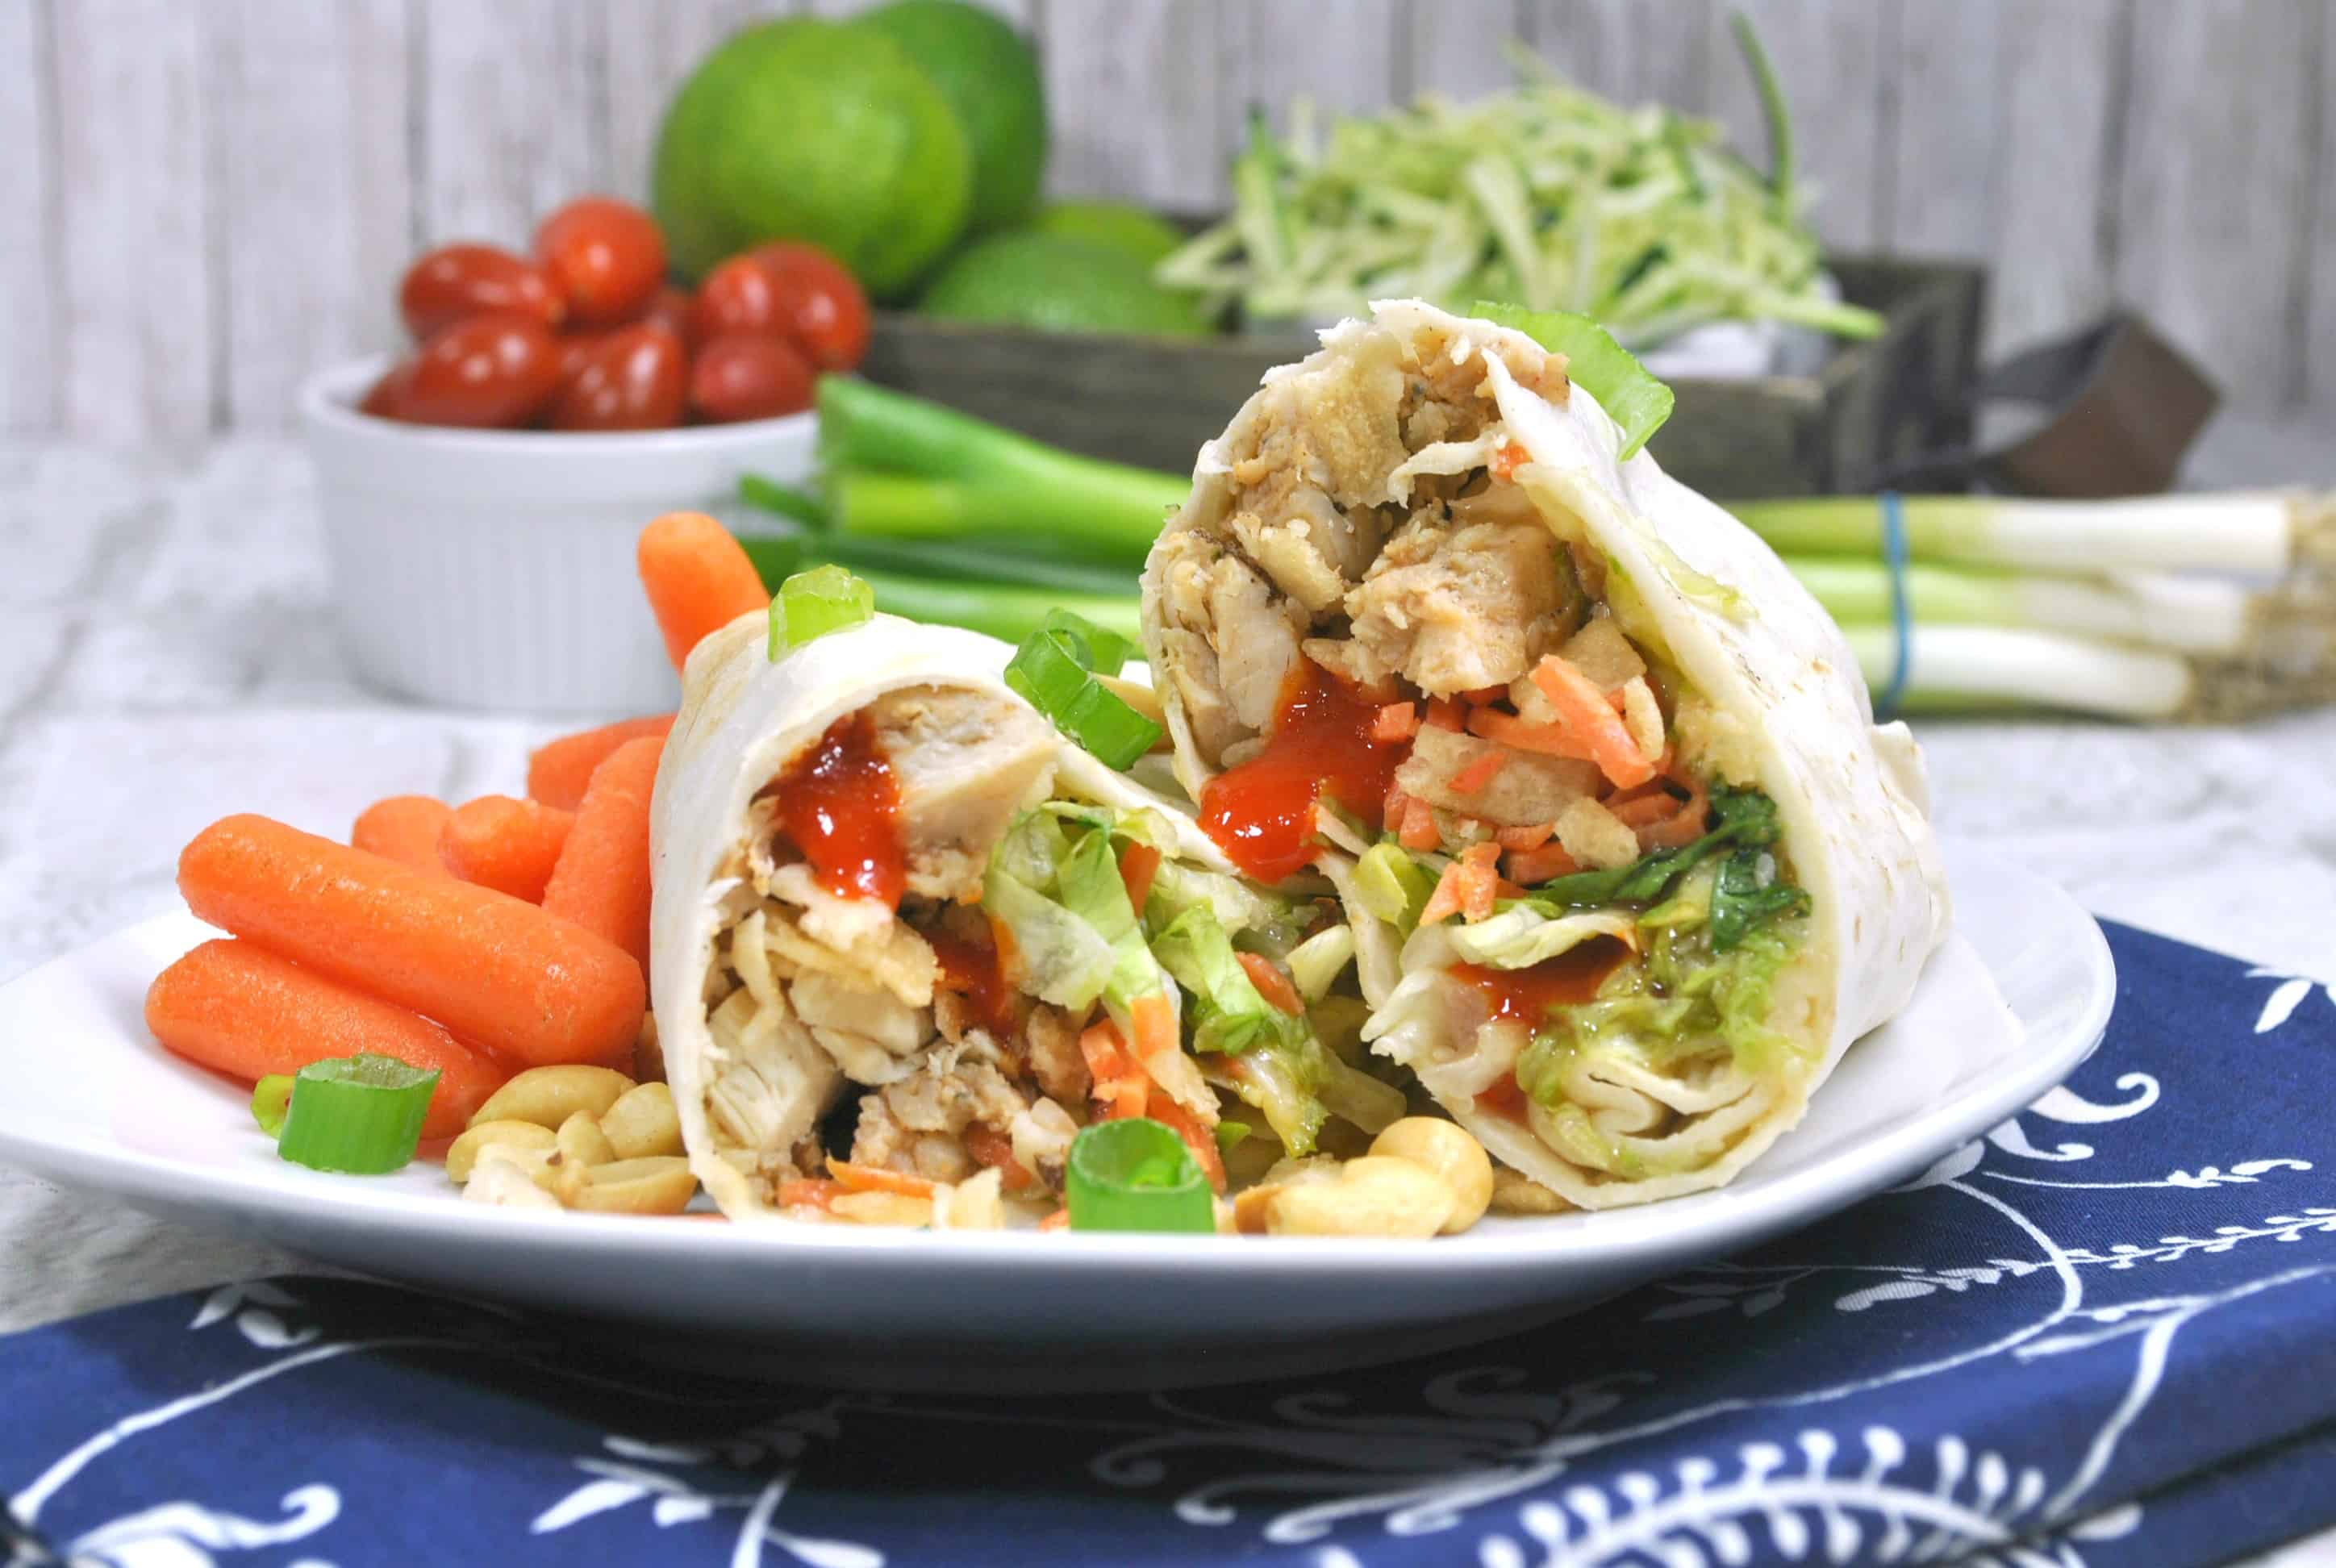 Weight Watchers Thai Chicken Wraps on plate with carrots